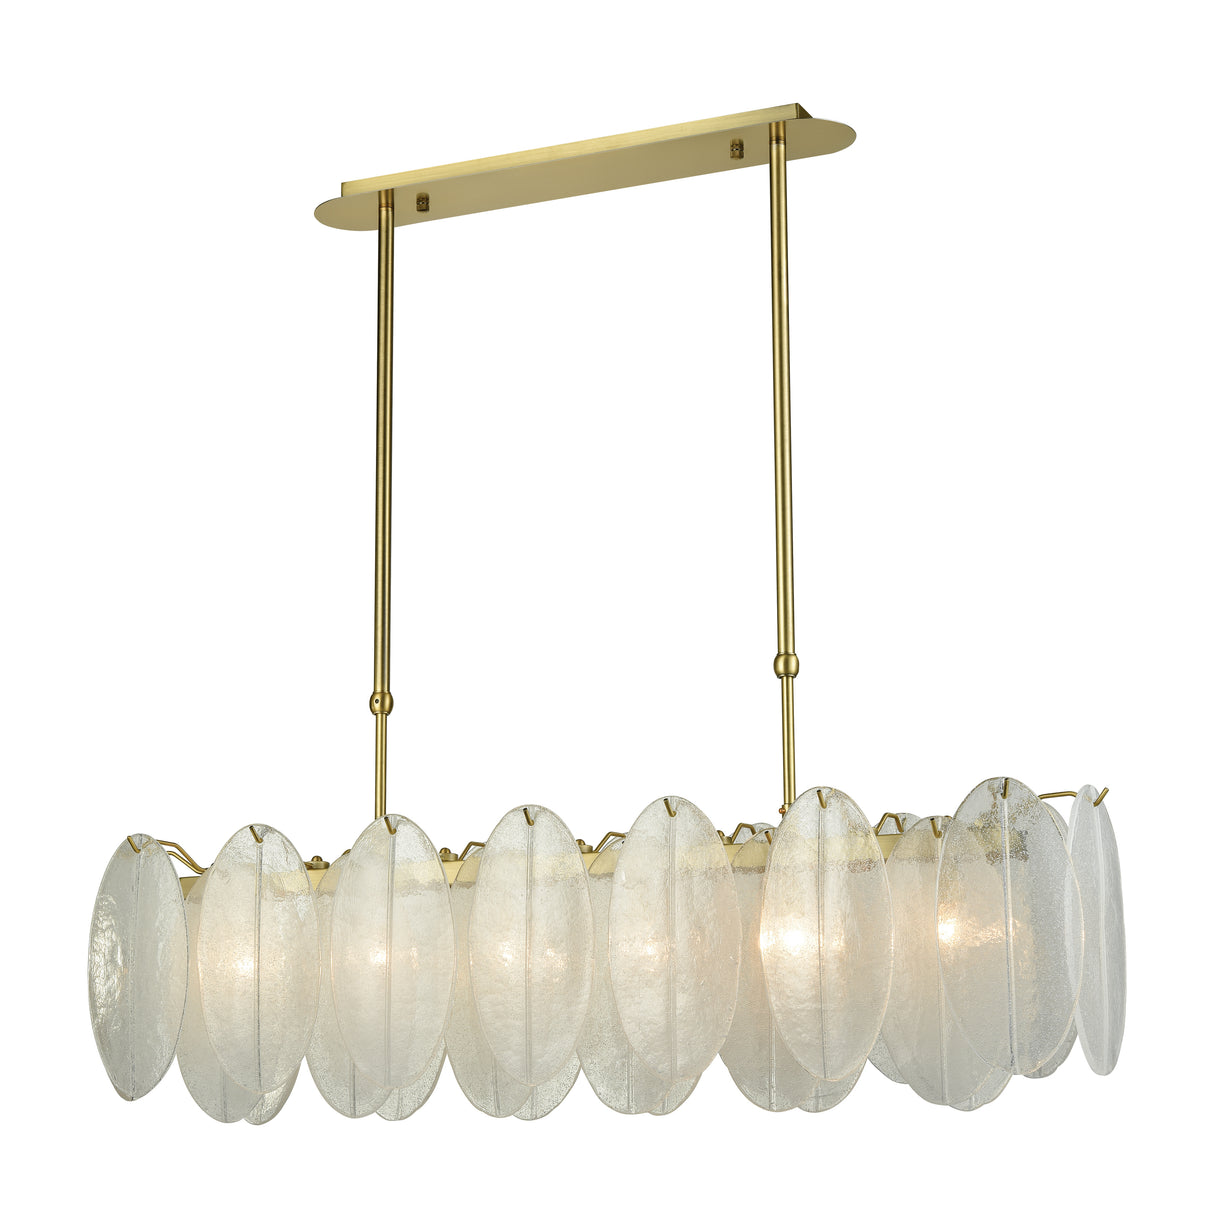 Elk D3311 Hush 47'' Wide 6-Light Linear Chandelier - Aged Brass with White